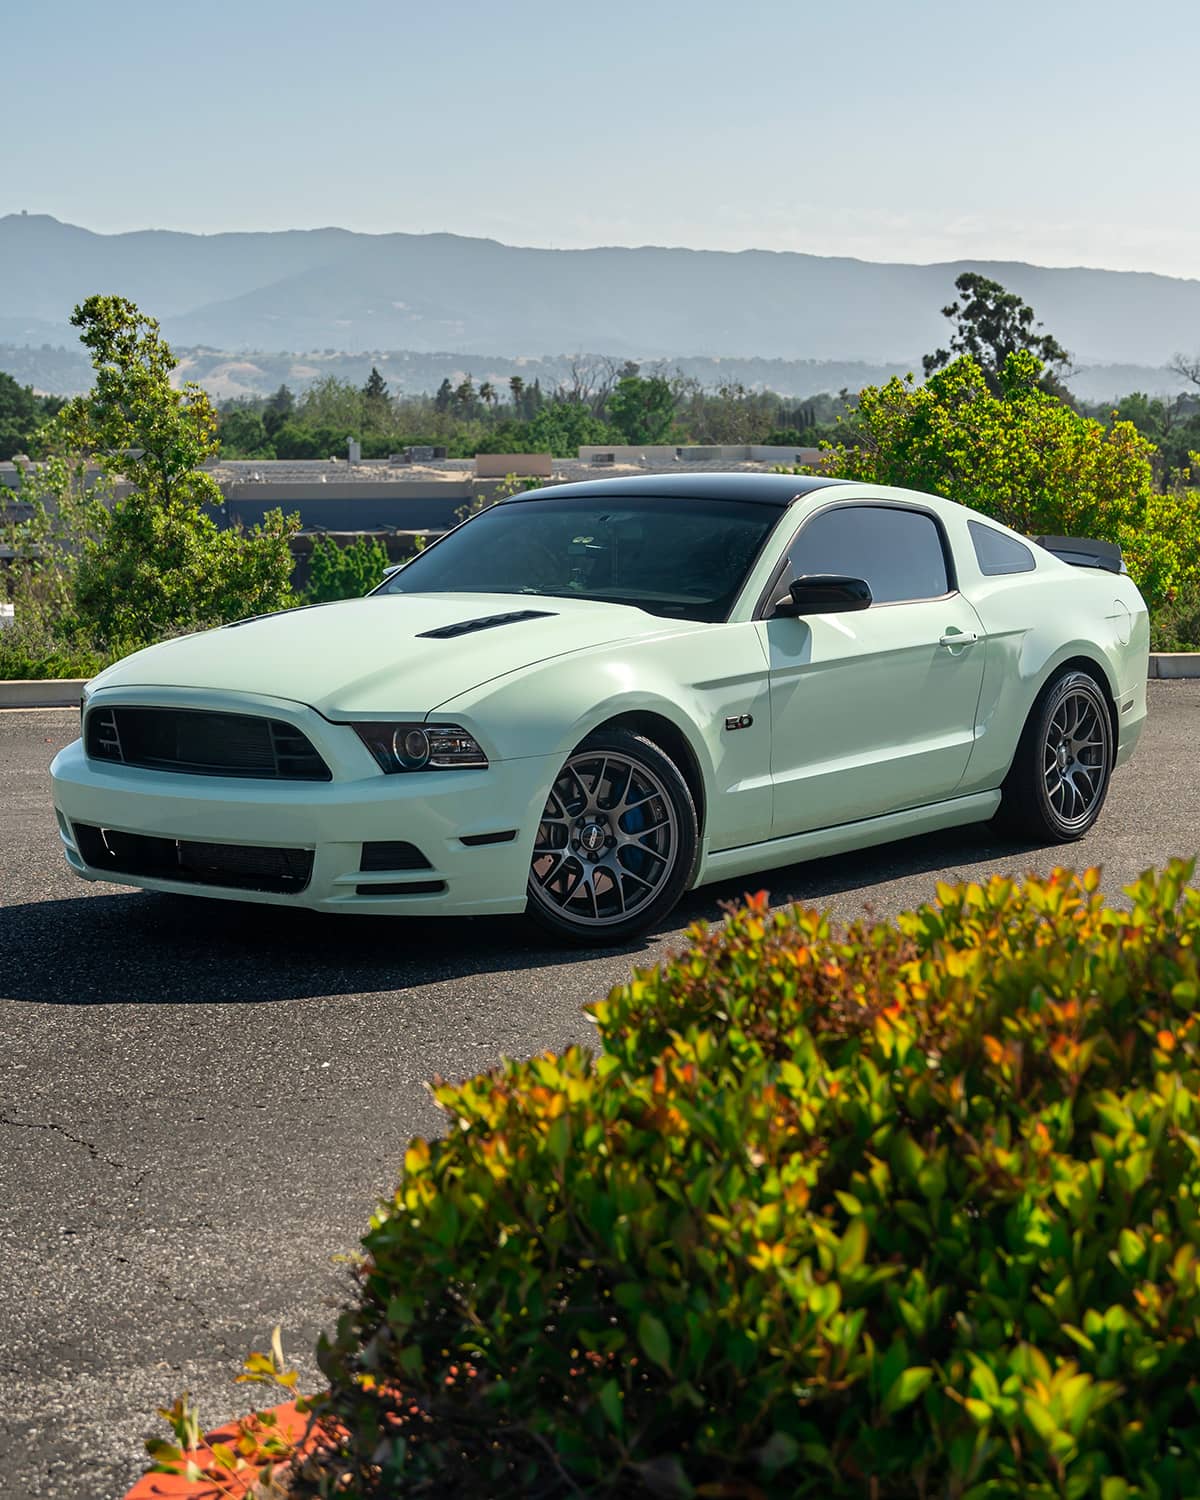 Clean 2014 Ford Mustang GT in Eye-Catching Pistachio Wrap